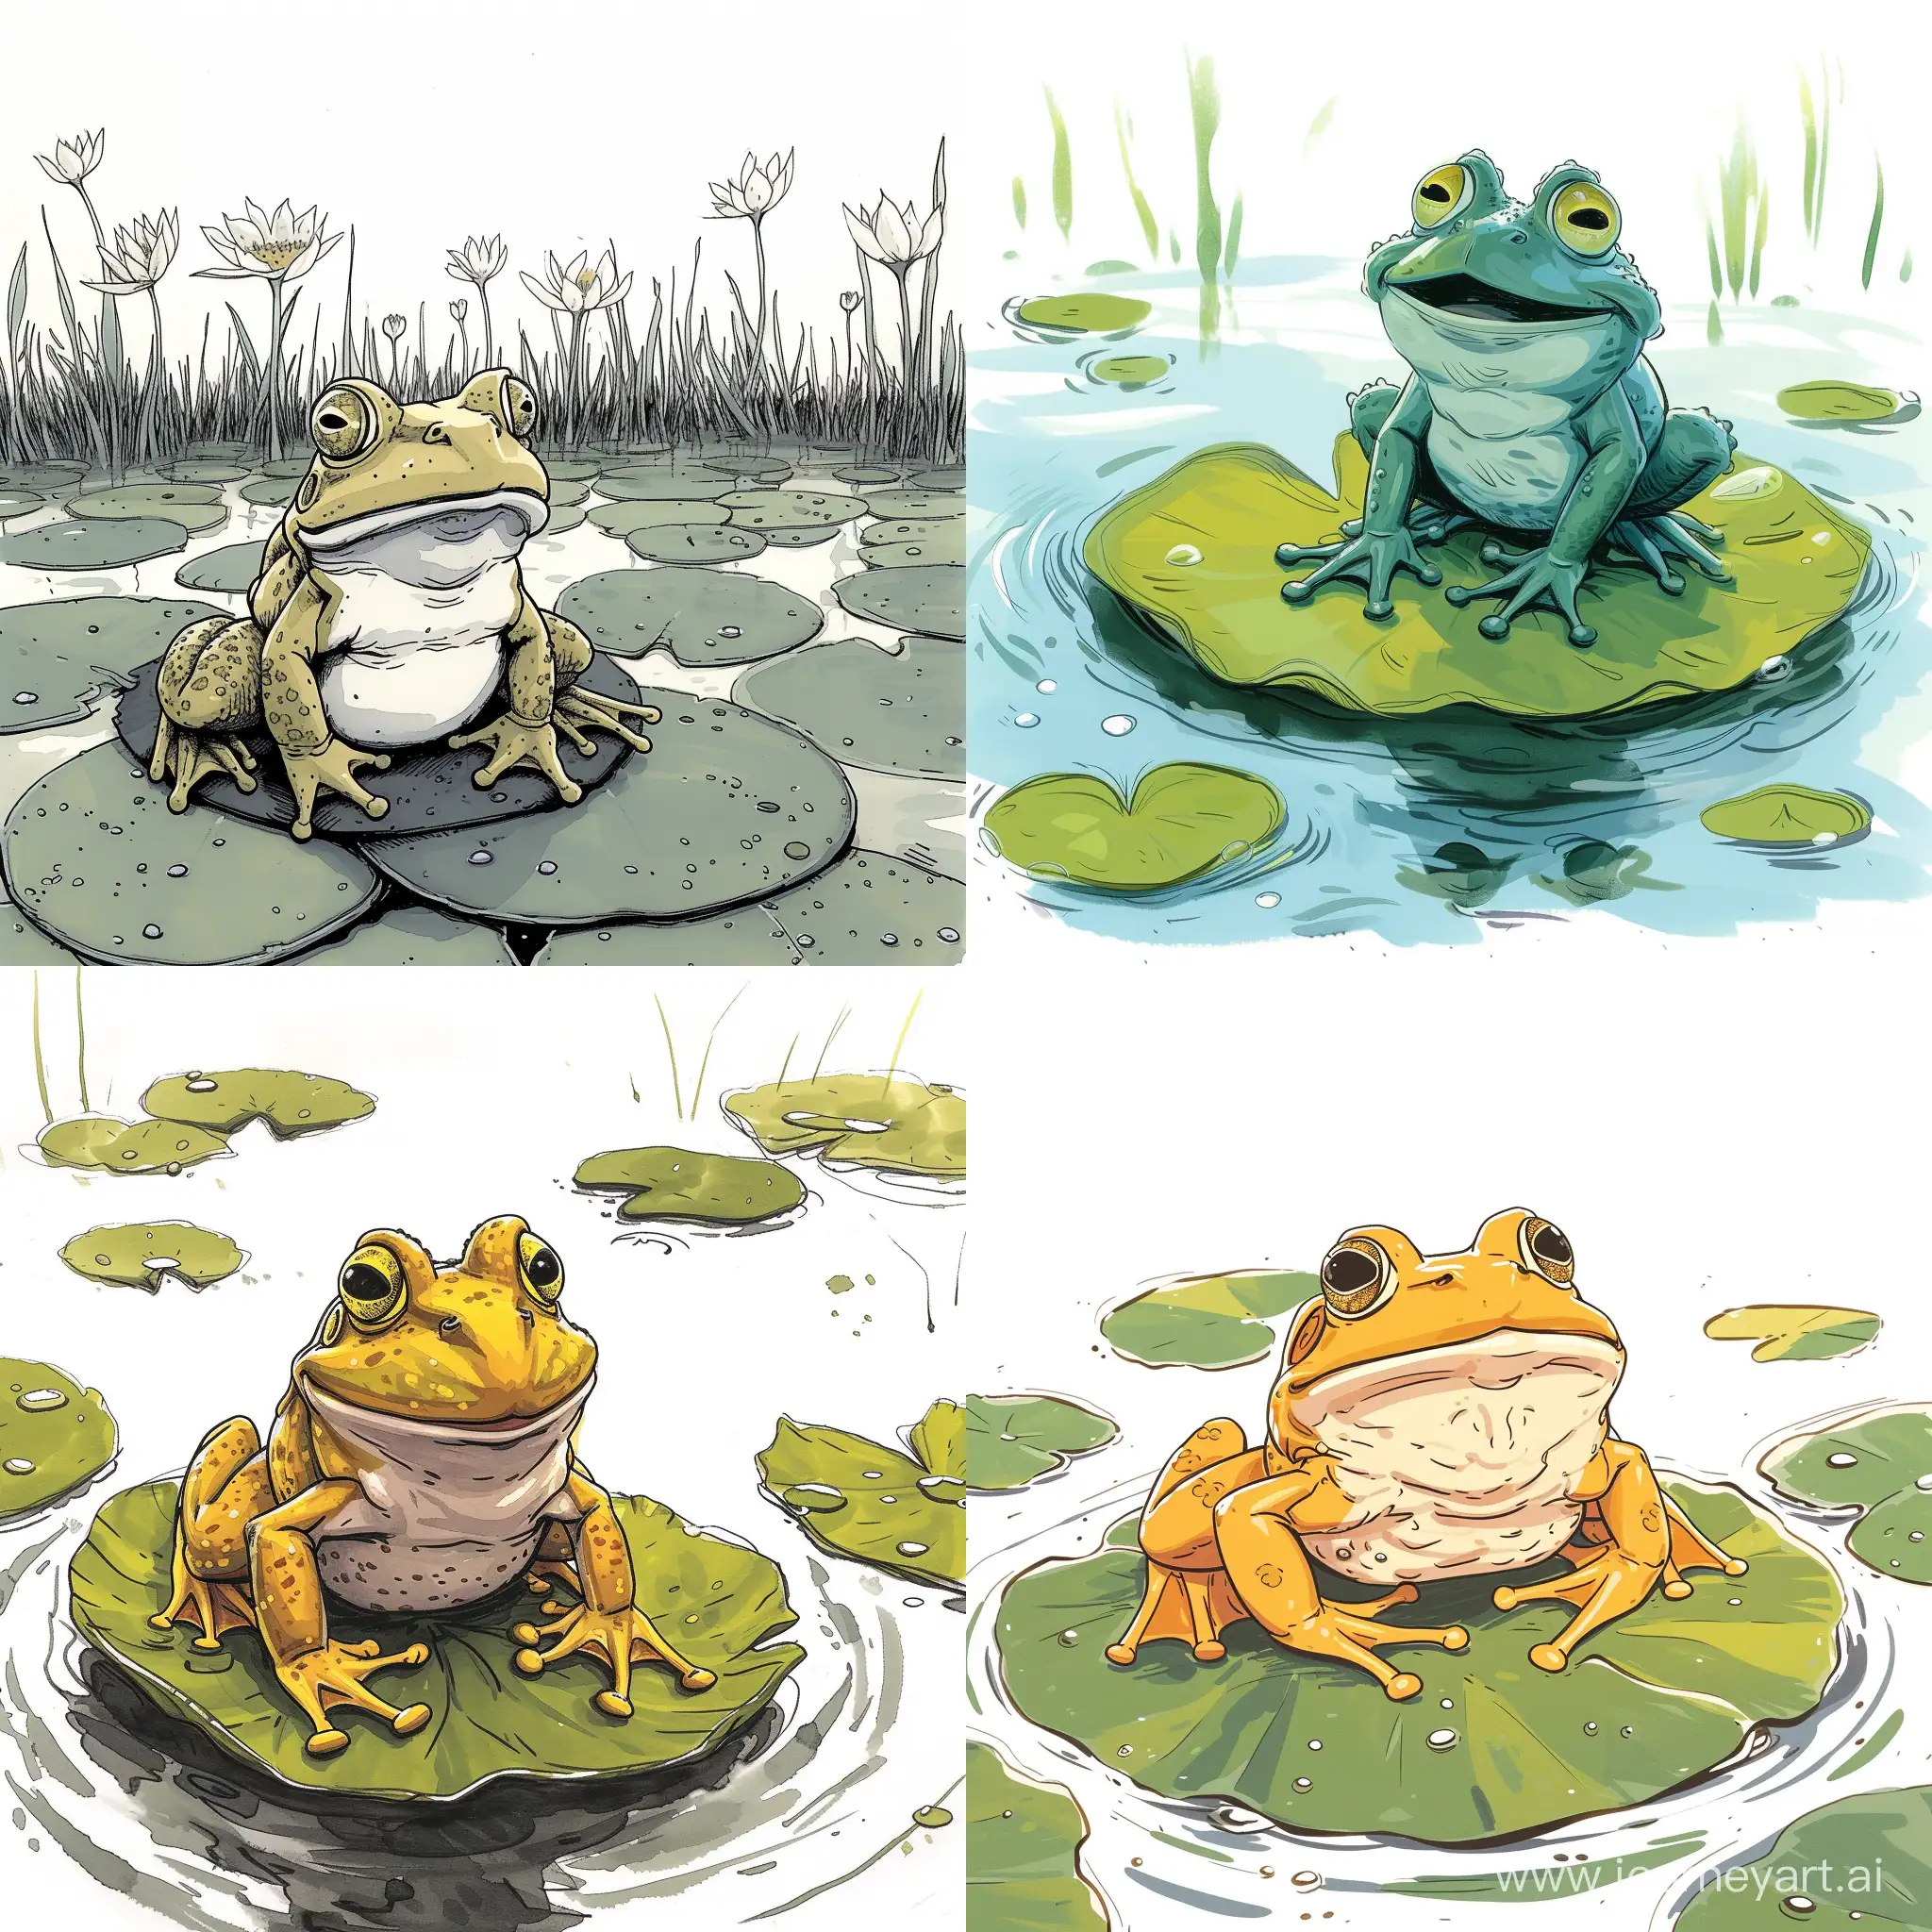 Chubby-Funky-Frog-on-Lily-Pad-Colorful-Dr-Seuss-Style-Illustration